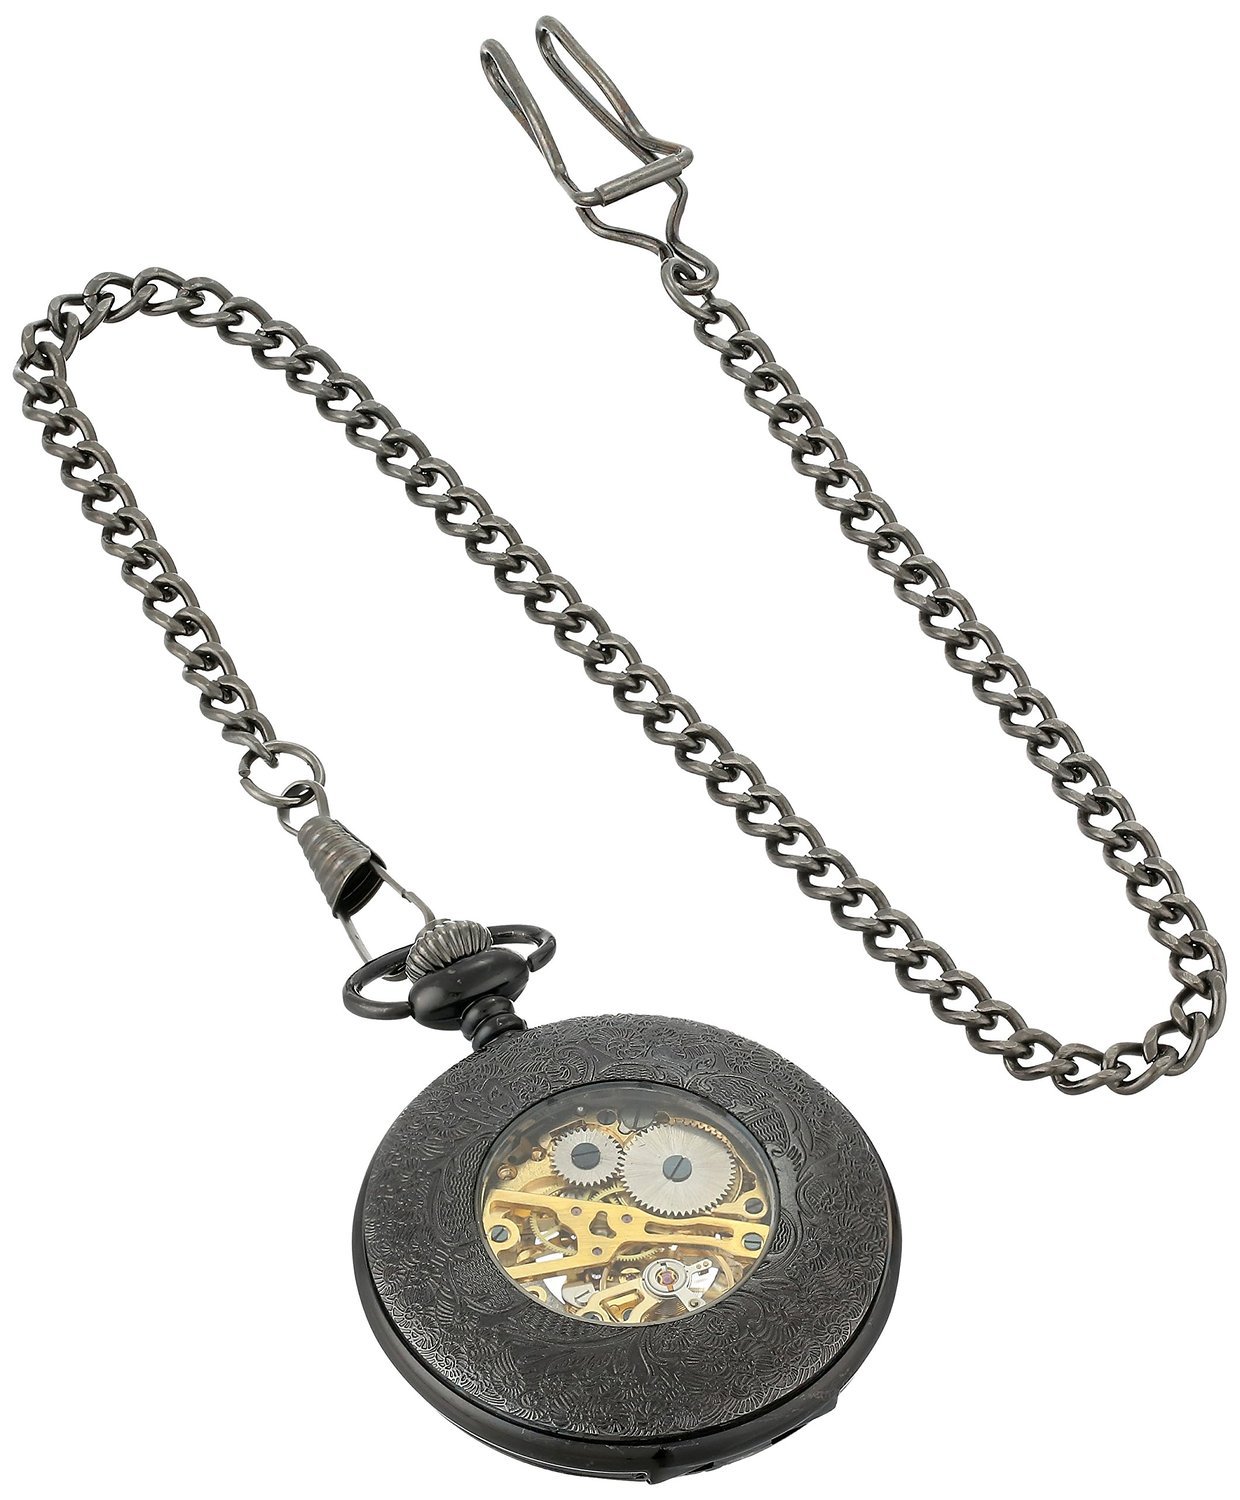 ShoppeWatch Men’s Pocket Watch with Chain | Hand Winding Vintage Pocket Watch | Classic Mechanical Movement Pocketwatch | 1920s Railroad Steampunk Costume Accessory